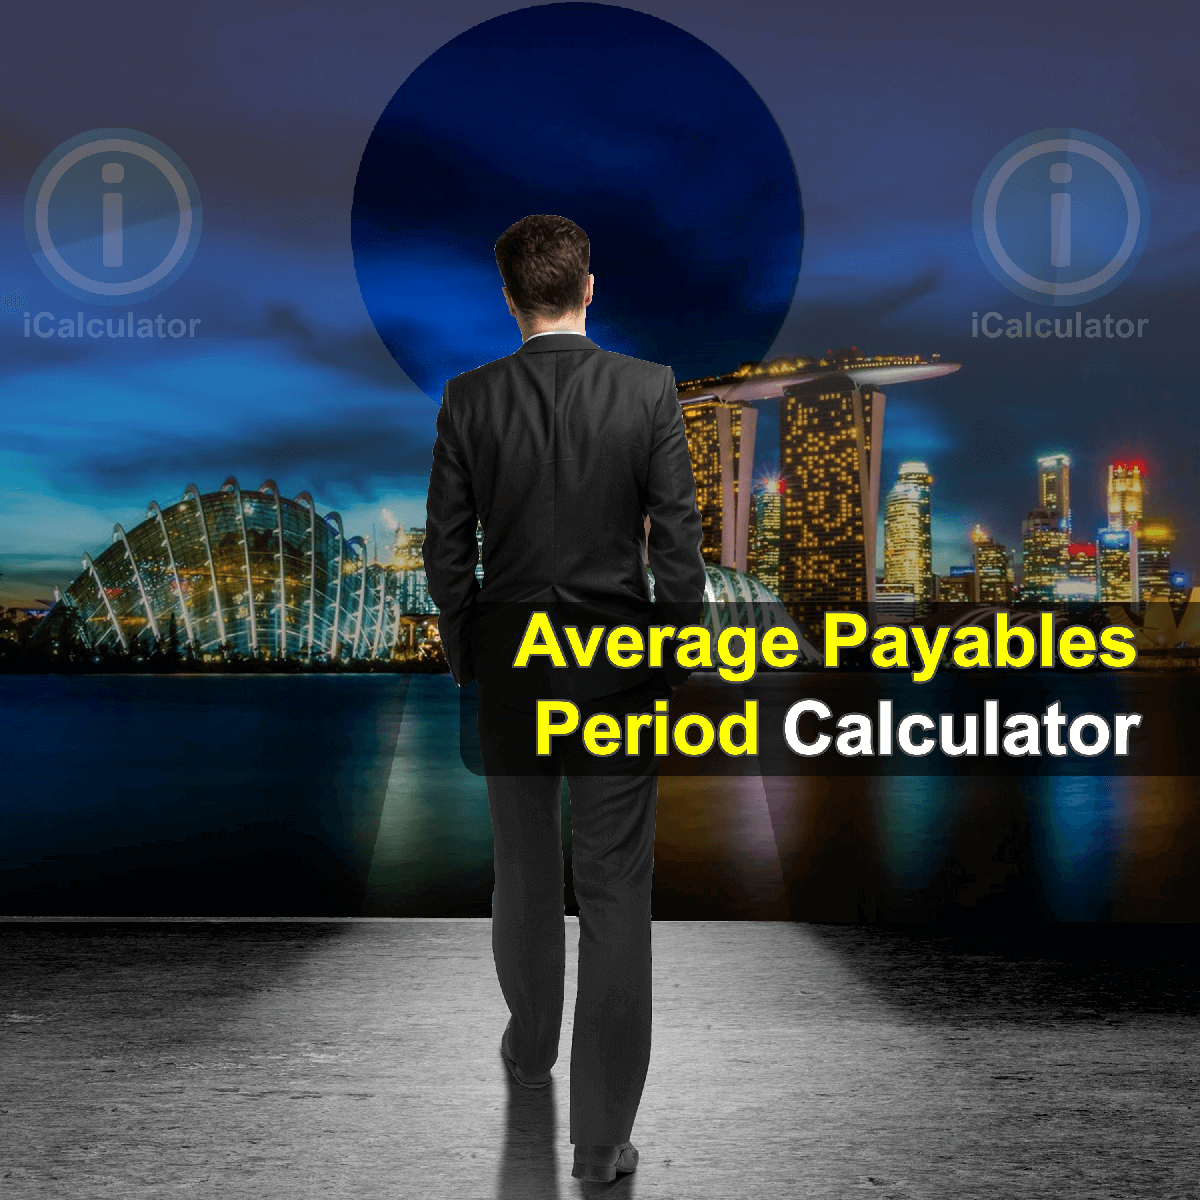 Average Payables Period Calculator. This image provides details of how to calculate the average payables period using a calculator and notepad. By using the Average Payables Period formula, the Average Payables Period Calculator provides a true calculation of the number of days your firm takes to pay off its suppliers and vendors